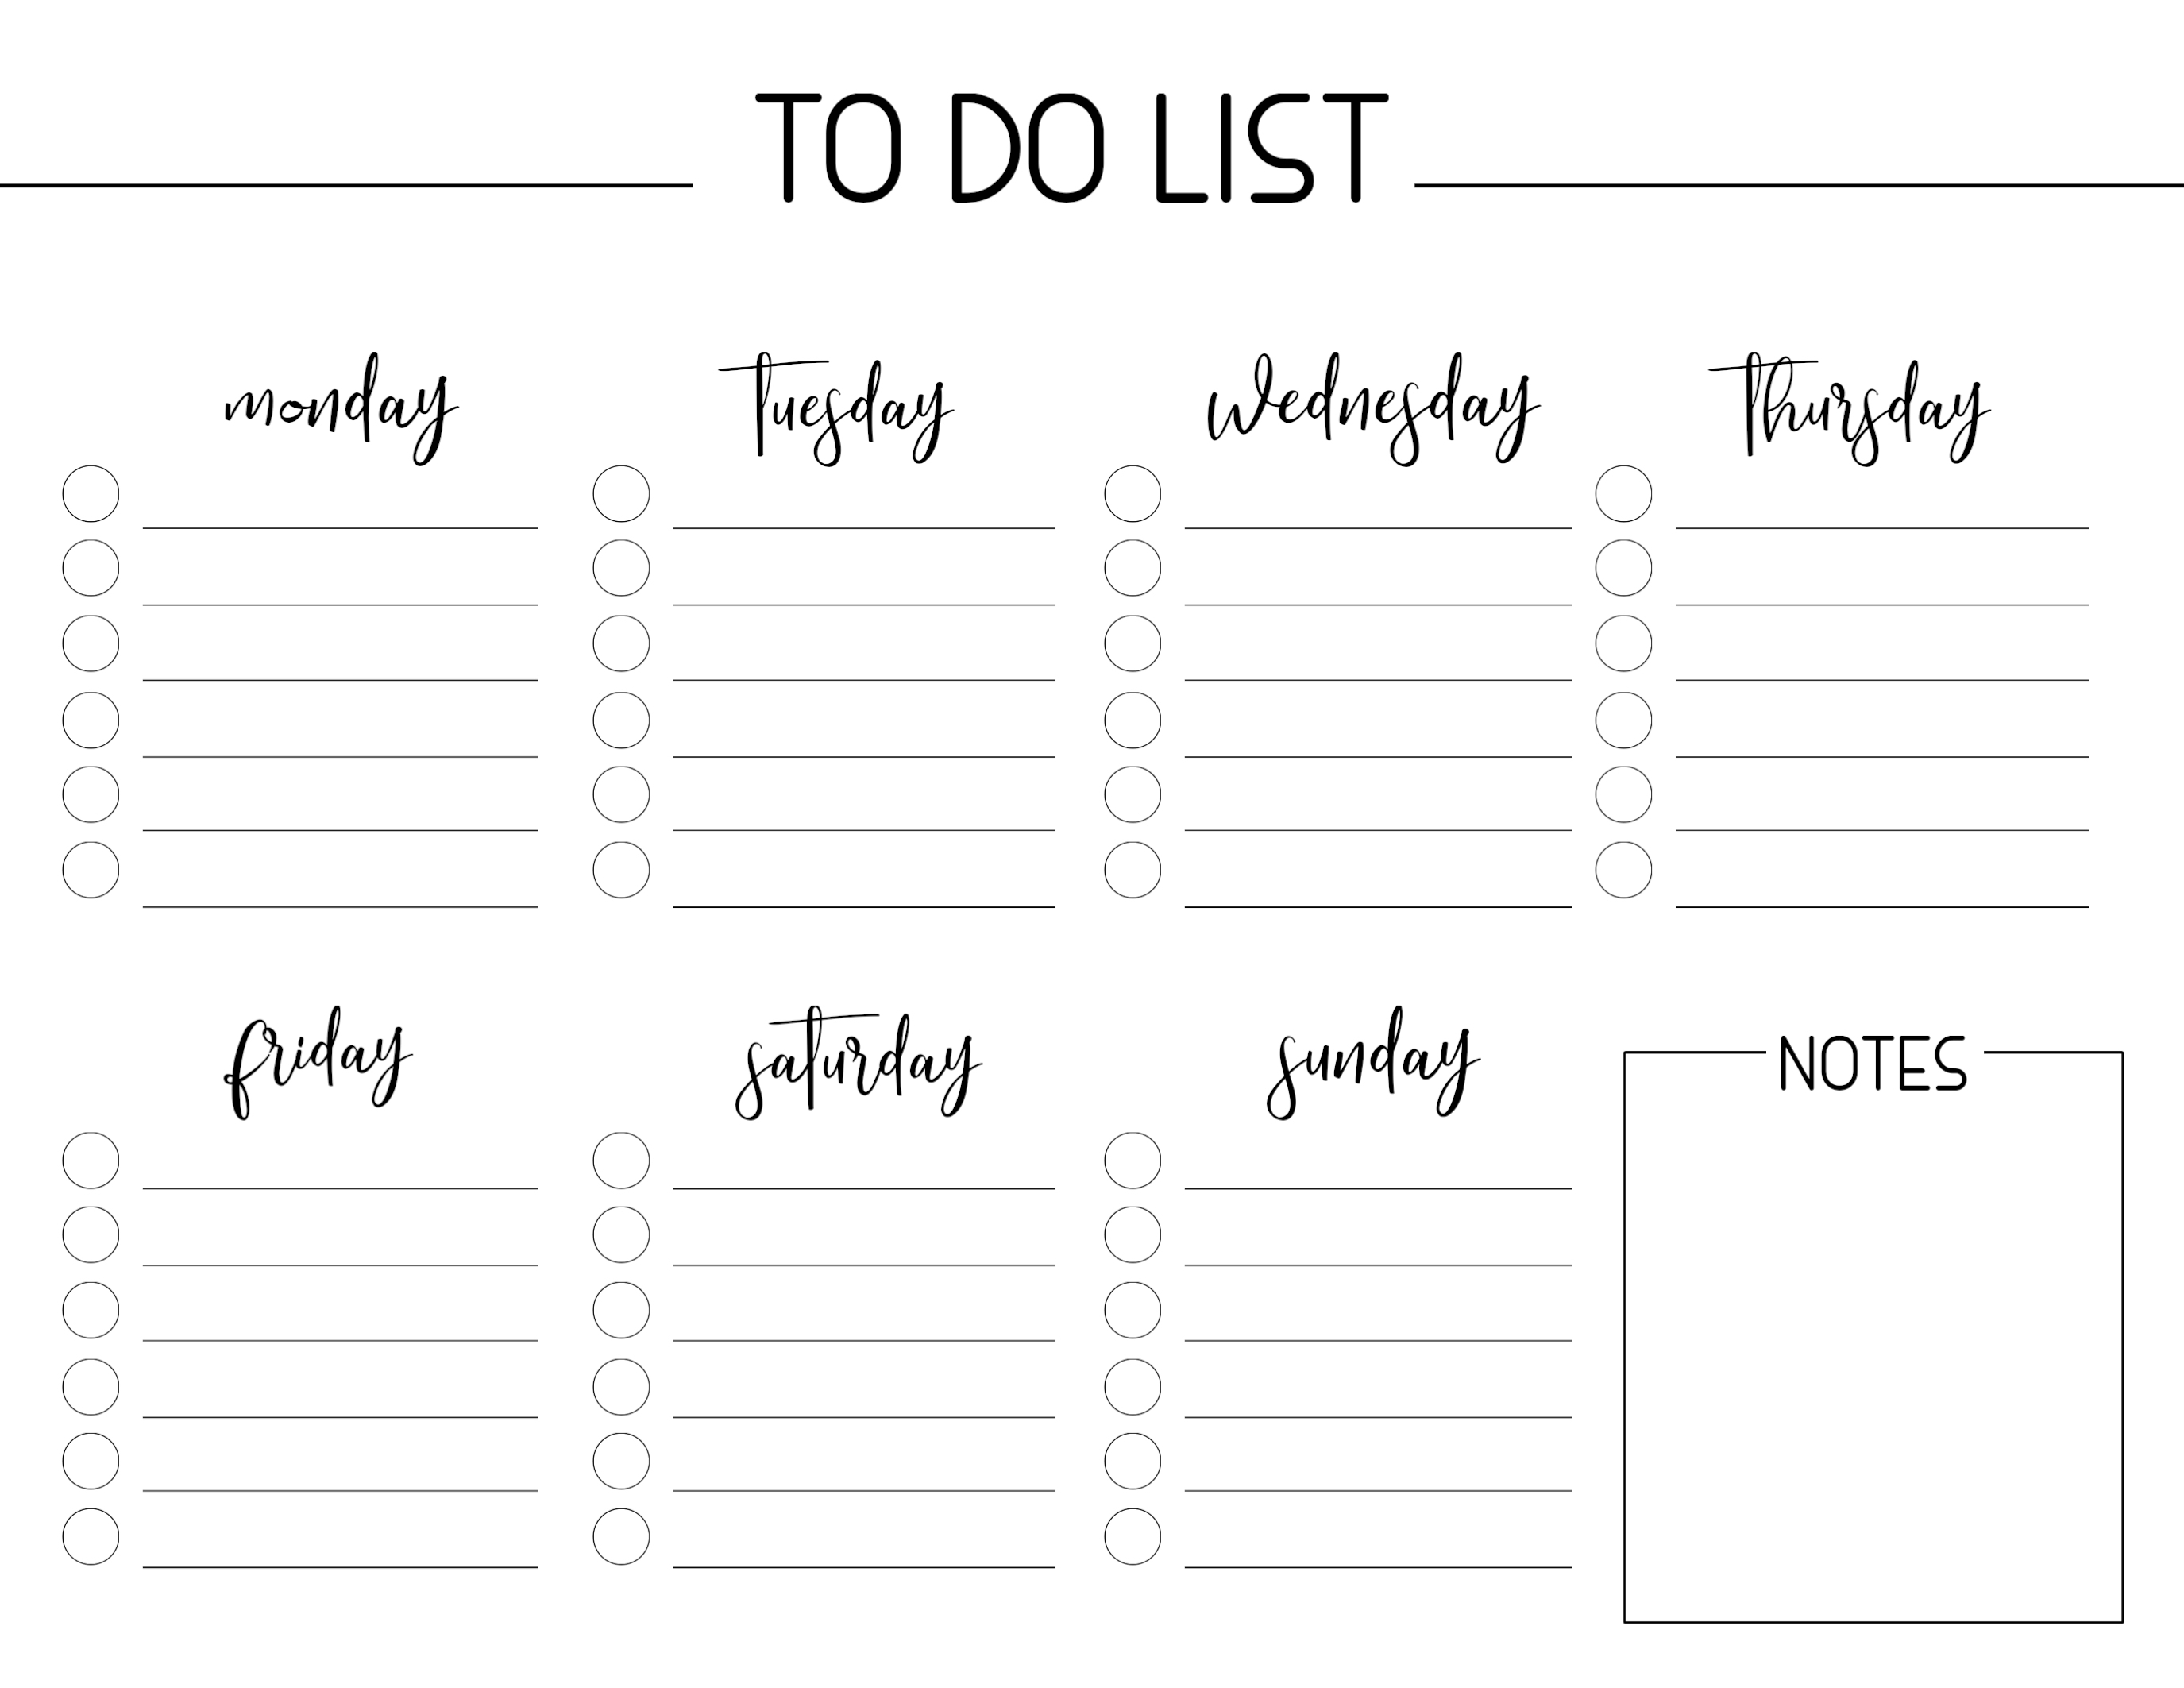 Weekly Free Printable To Do List - Paper Trail Design pertaining to Printable To Do Monday To Friday